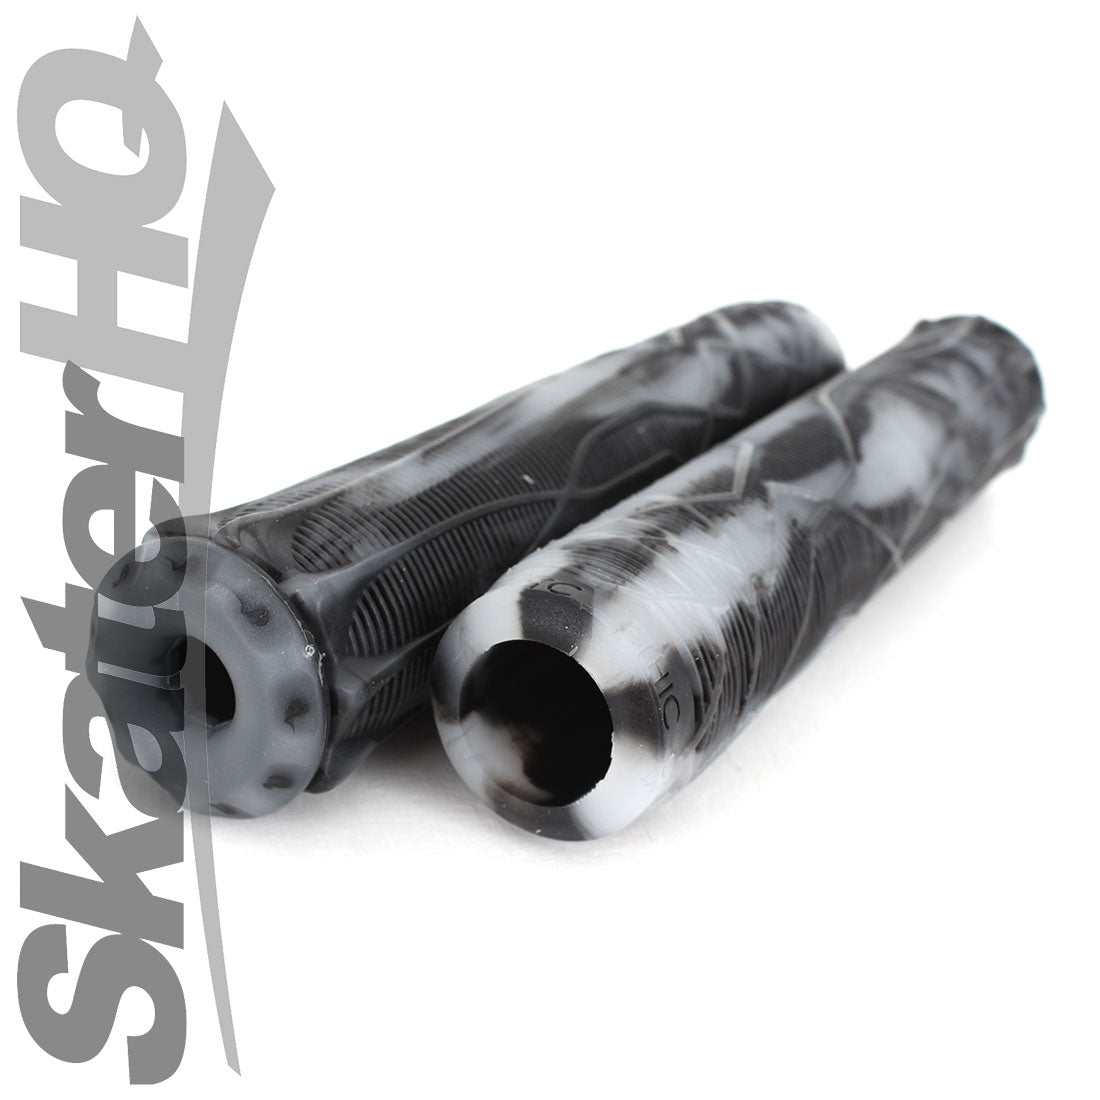 Ethic DTC Handle Grips - Black/Clear Scooter Grips